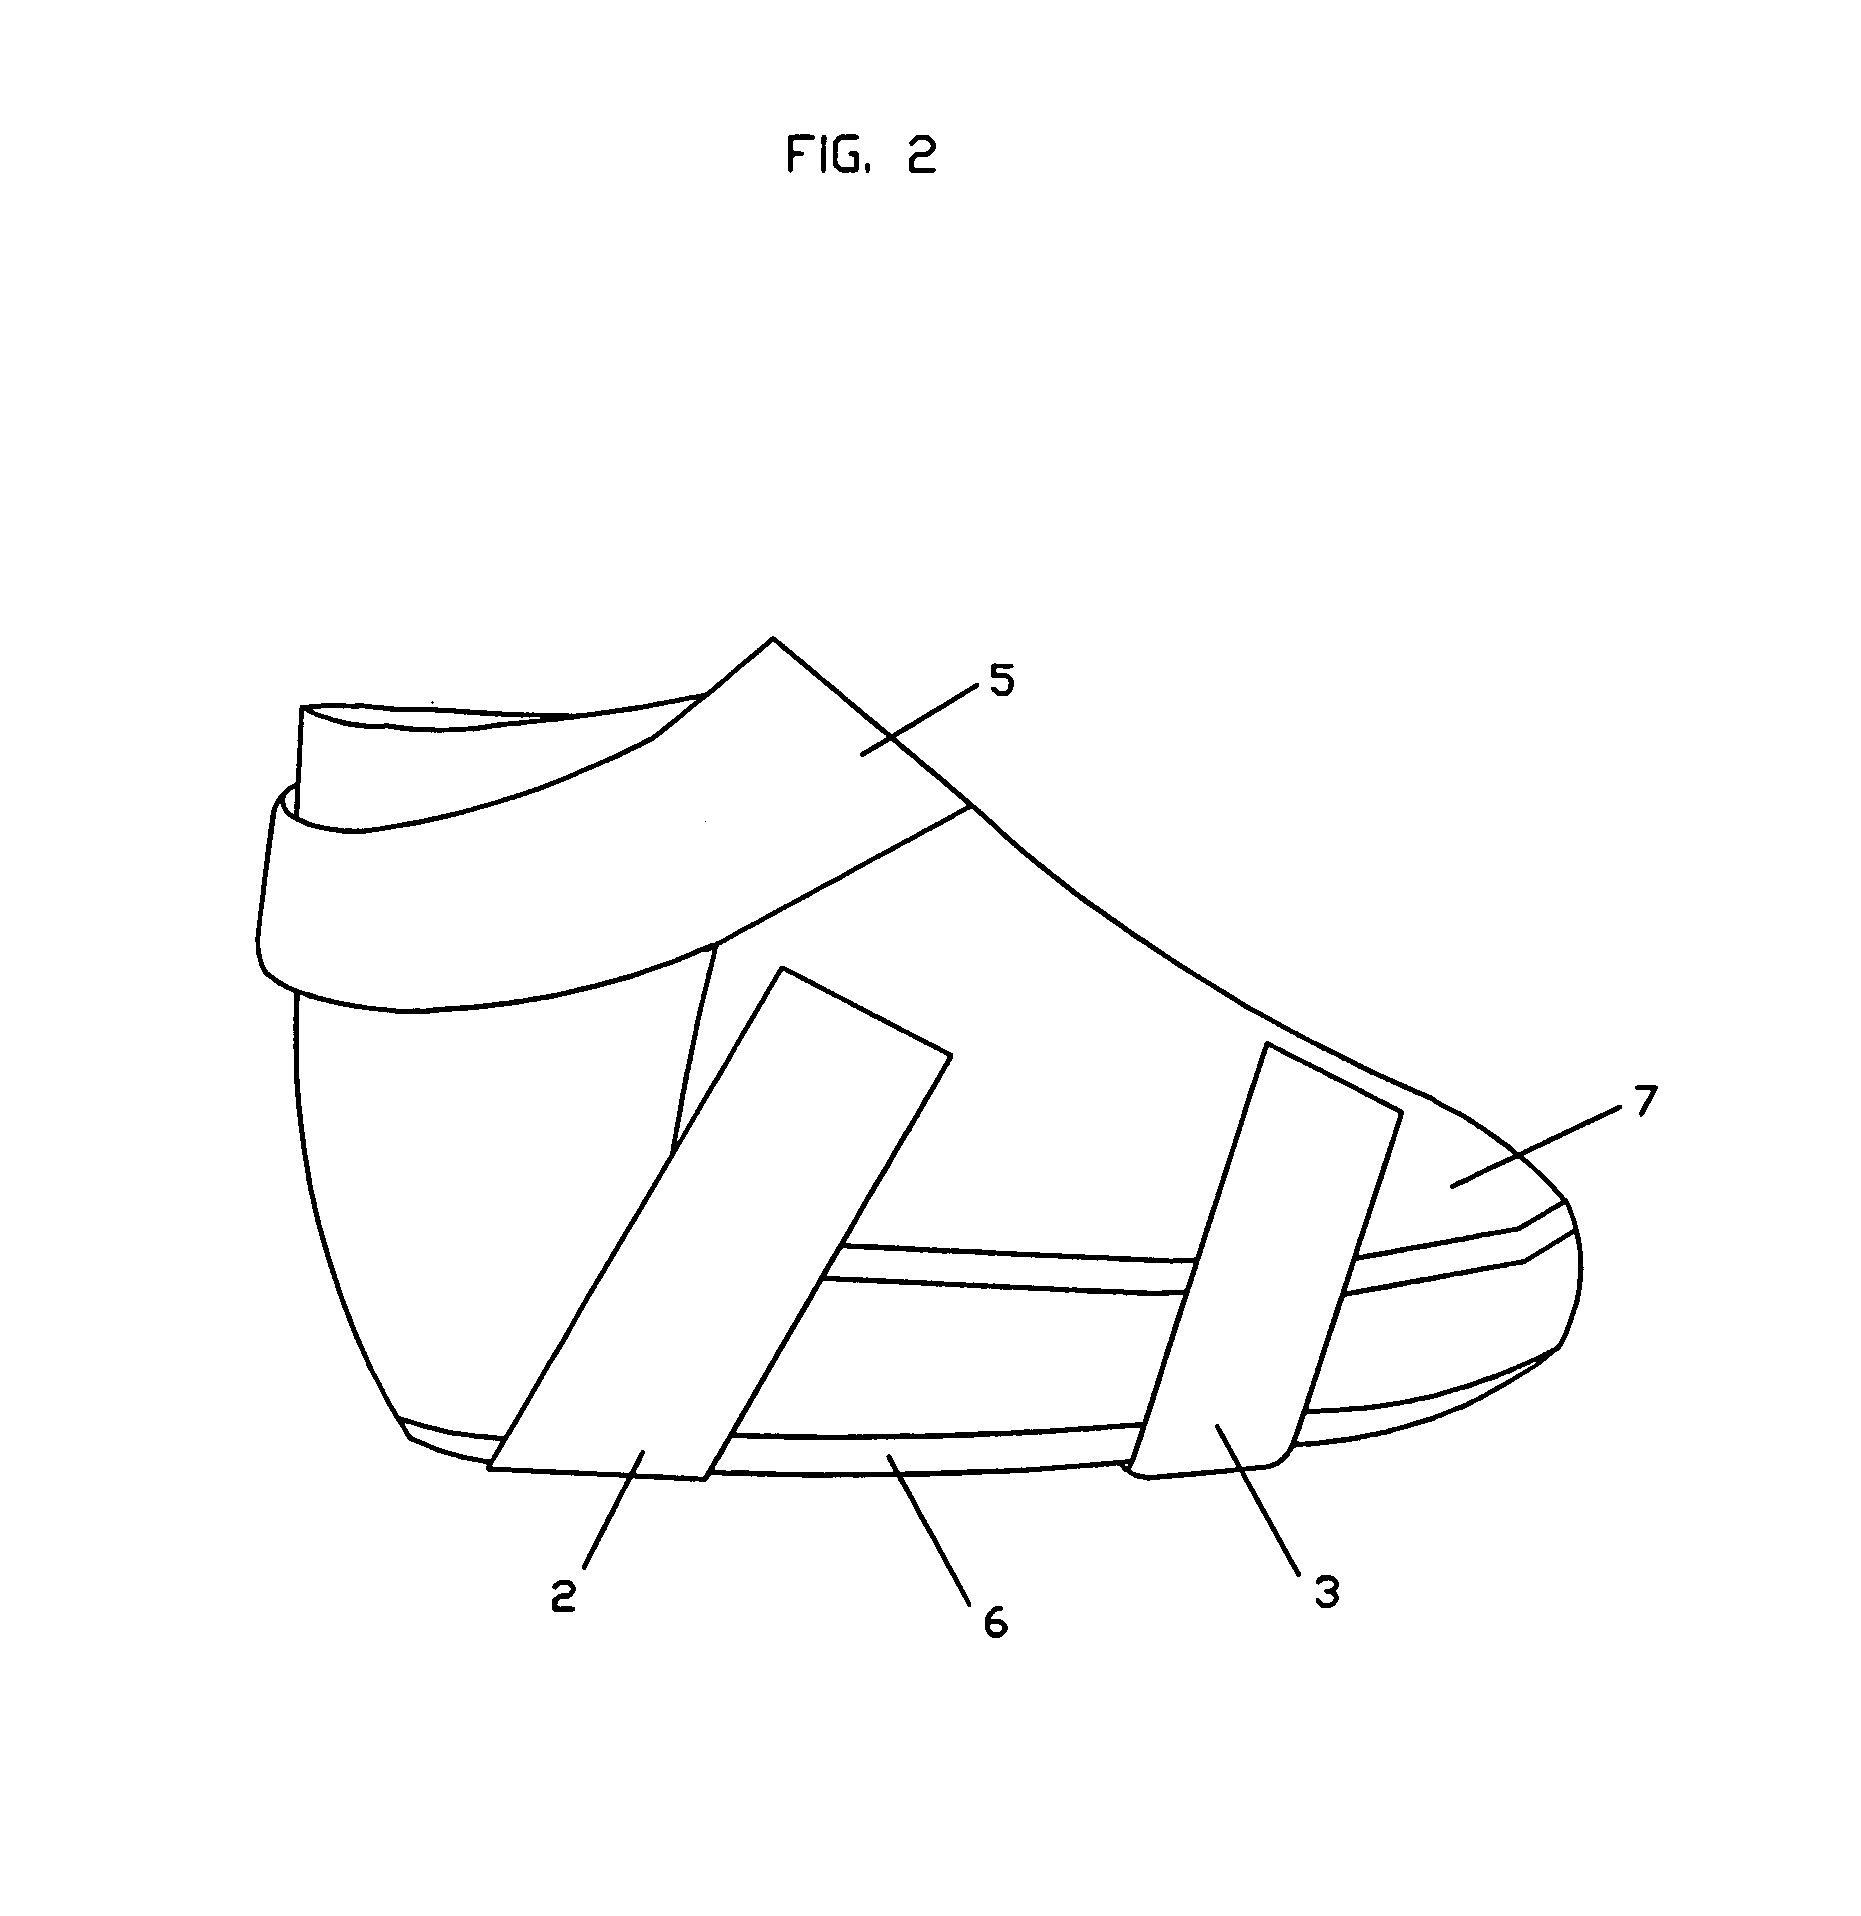 Non-ambulatory thermotherapy device for heat and cold therapy of the foot/ankle complex and hand/wrist complex